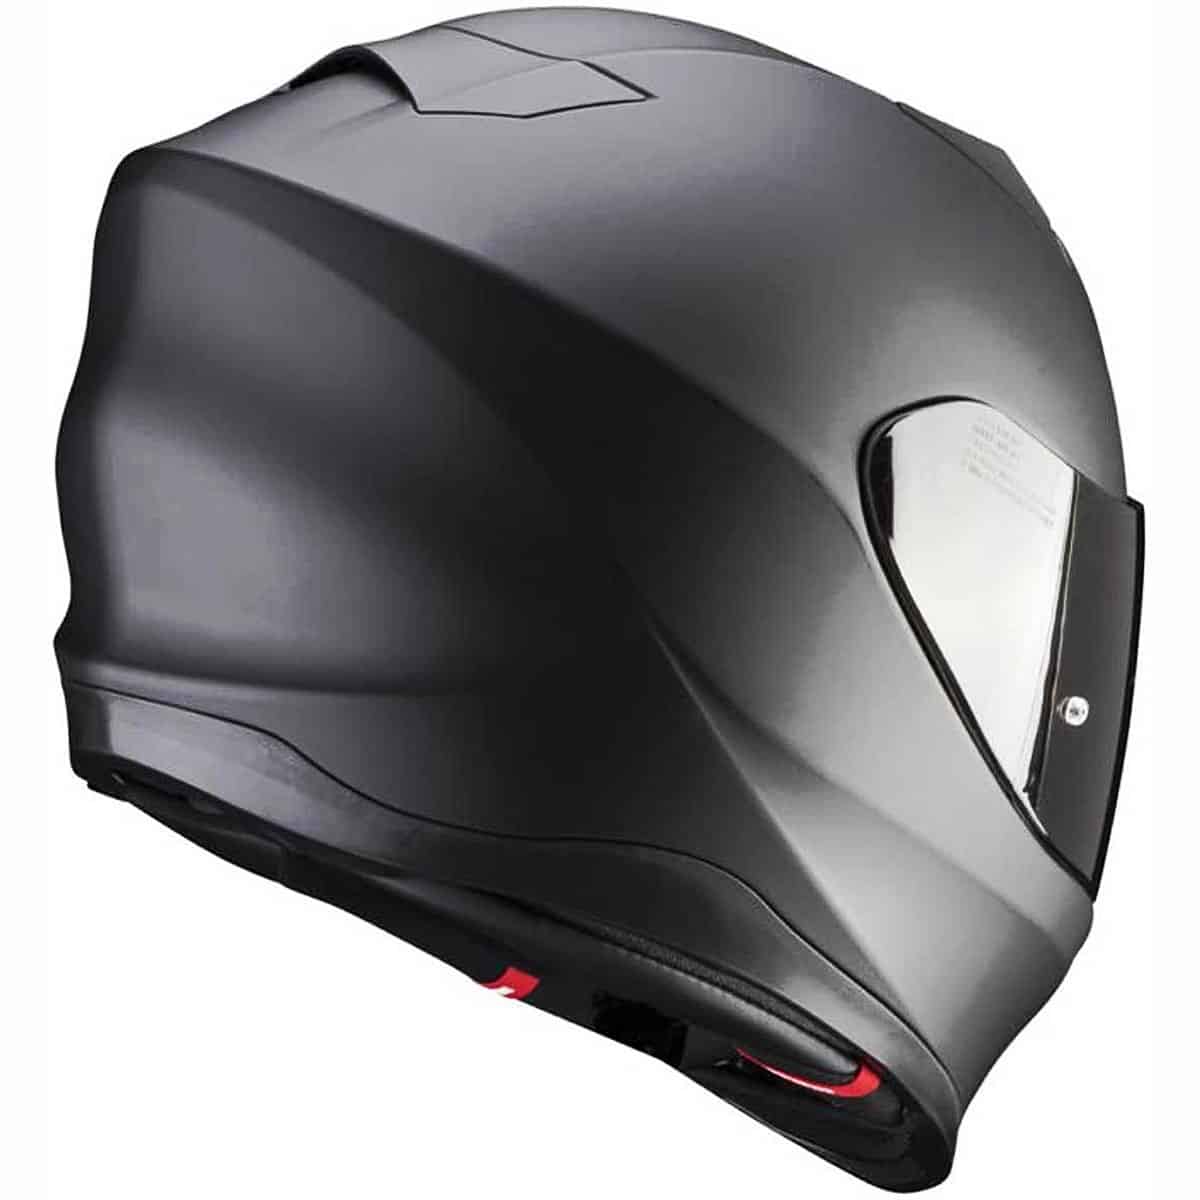 Clear vision in any condition with the Scorpion Exo-520 helmet: Enjoy a stylish fog-free ride with Pinlock 100% Max Vision technology 3